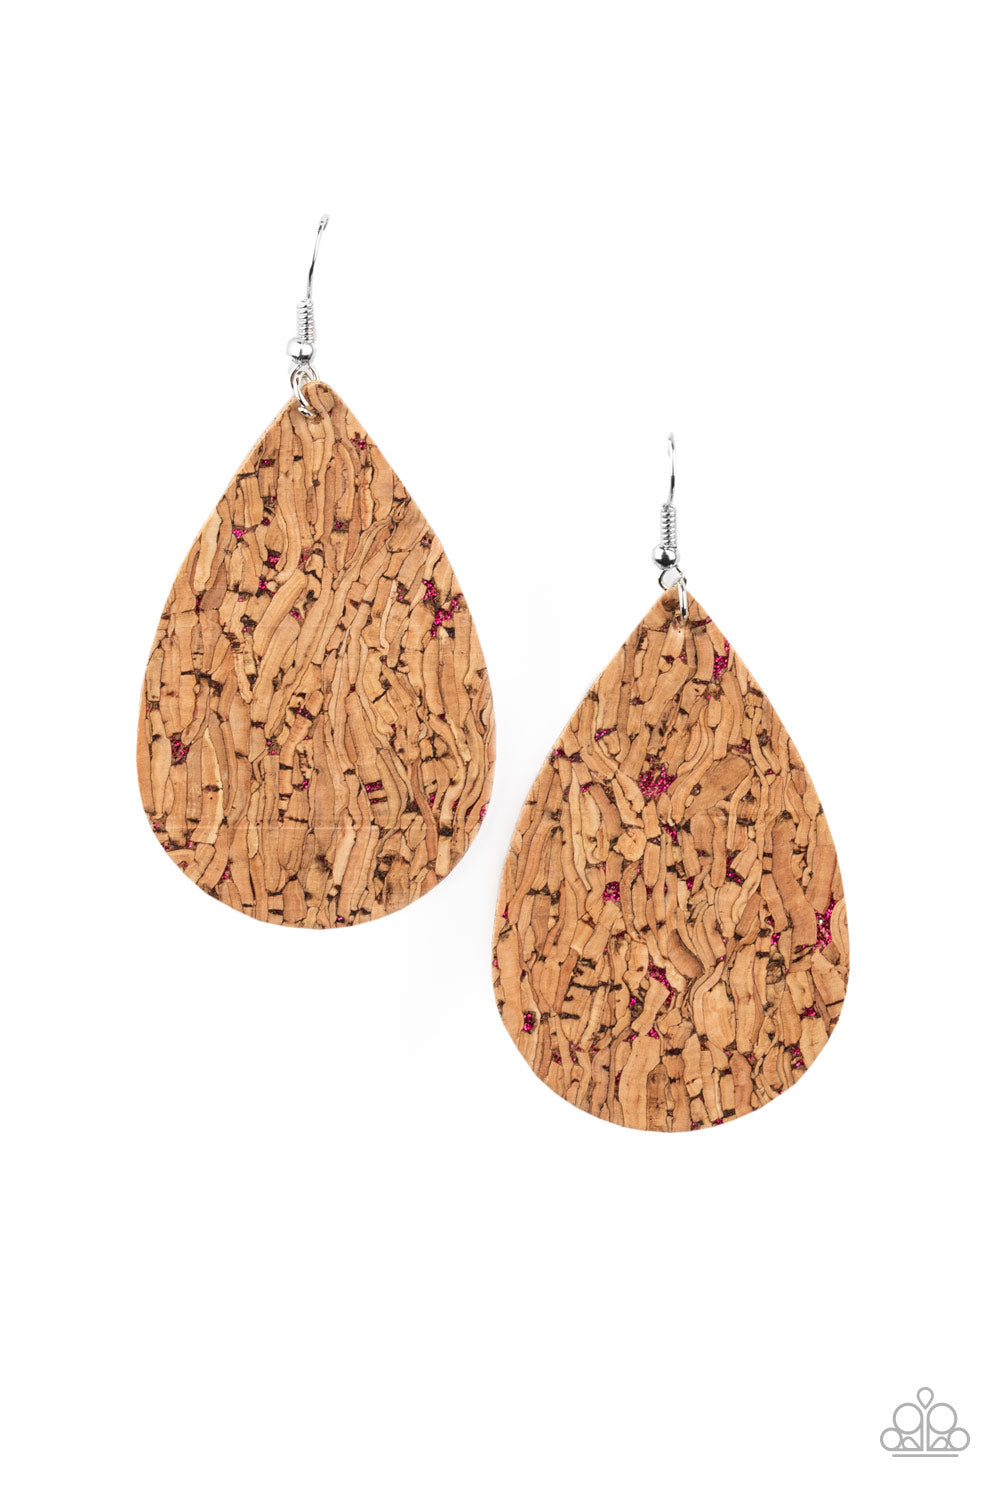 CORK It Over Pink Earring - Paparazzi Accessories  Flecked in metallic pink accents, a cork-like teardrop frame swings from the ear for a seasonal look. Earring attaches to a standard fishhook fitting.  All Paparazzi Accessories are lead free and nickel free!  Sold as one pair of earrings.